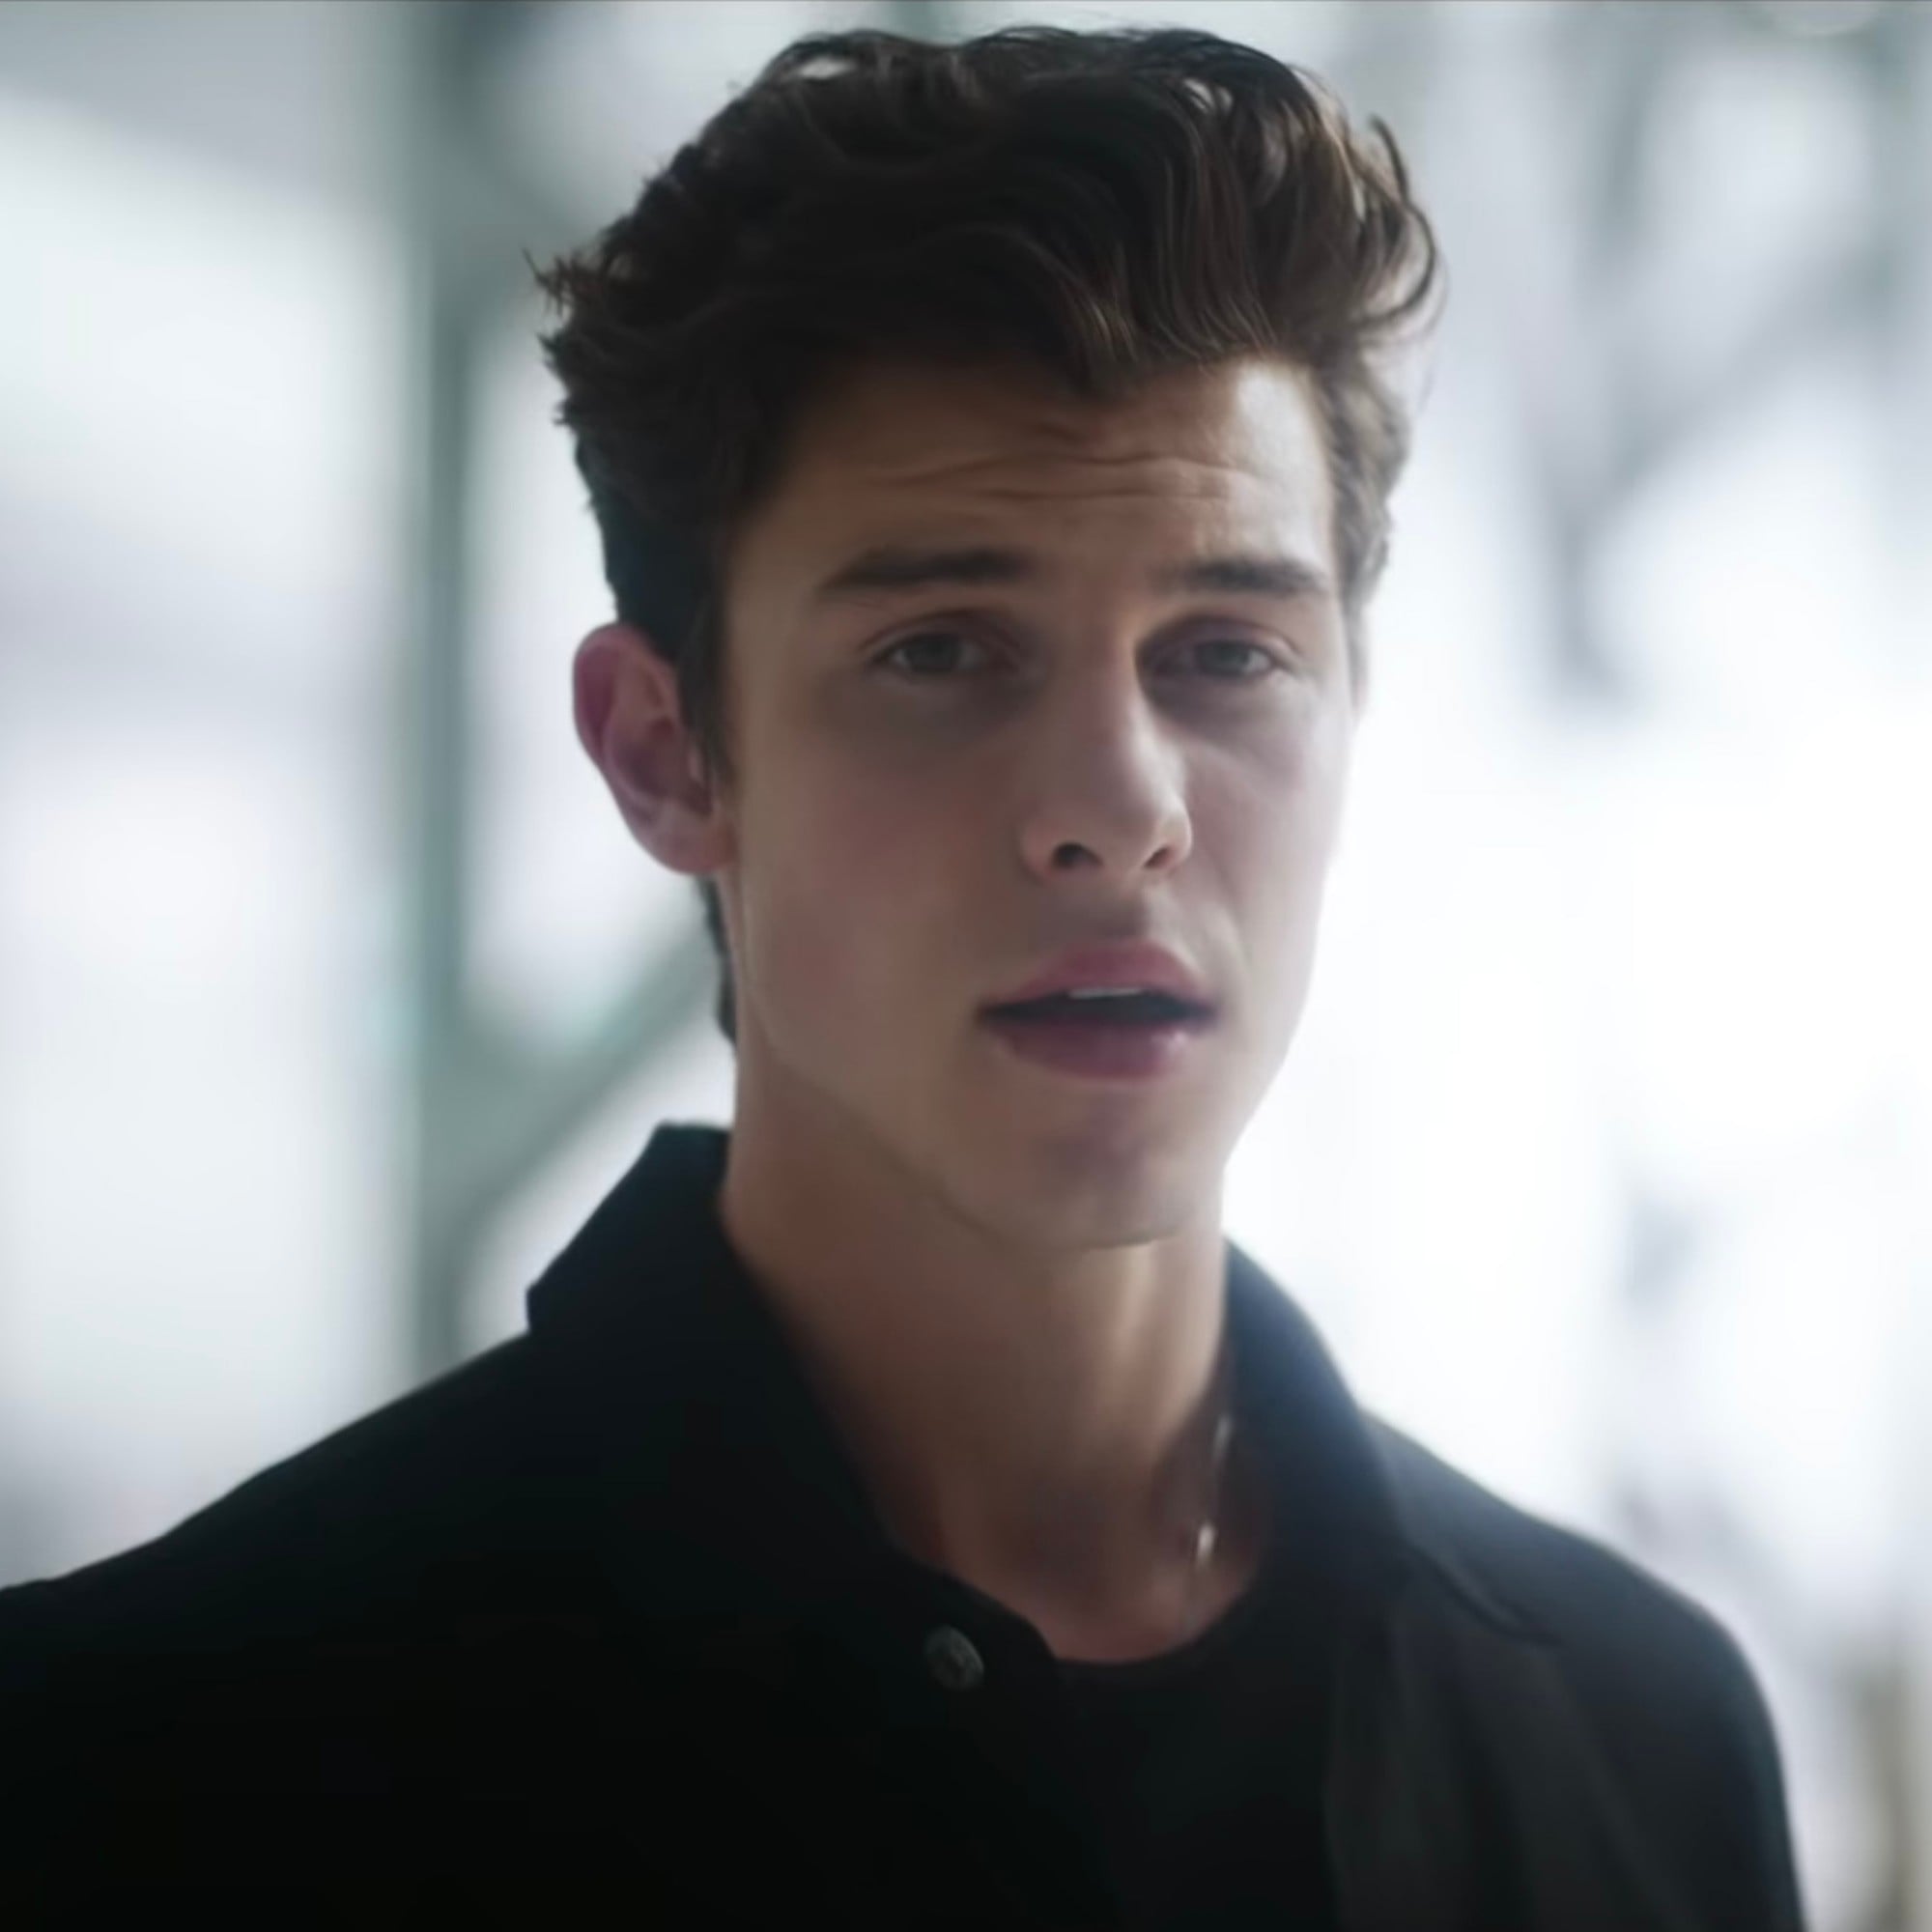 neighbor Seraph Intolerable Shawn Mendes and Khalid "Youth" Music Video | POPSUGAR Entertainment